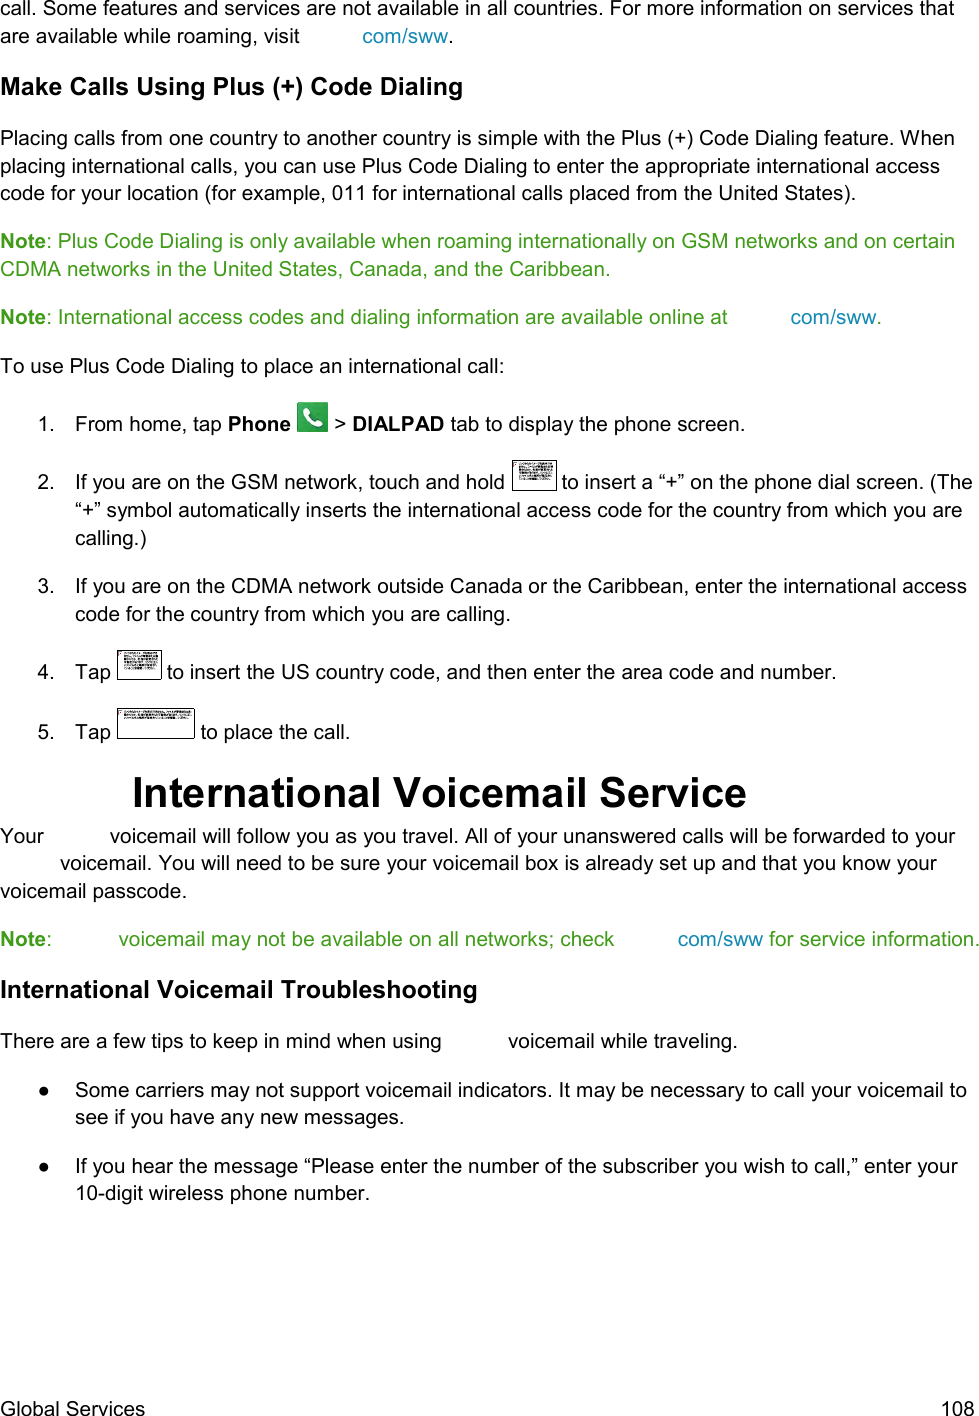  Global Services  108 call. Some features and services are not available in all countries. For more information on services that are available while roaming, visit  com/sww. Make Calls Using Plus (+) Code Dialing Placing calls from one country to another country is simple with the Plus (+) Code Dialing feature. When placing international calls, you can use Plus Code Dialing to enter the appropriate international access code for your location (for example, 011 for international calls placed from the United States). Note: Plus Code Dialing is only available when roaming internationally on GSM networks and on certain CDMA networks in the United States, Canada, and the Caribbean.  Note: International access codes and dialing information are available online at  com/sww. To use Plus Code Dialing to place an international call:  1.  From home, tap Phone   &gt; DIALPAD tab to display the phone screen. 2.  If you are on the GSM network, touch and hold   to insert a “+” on the phone dial screen. (The “+” symbol automatically inserts the international access code for the country from which you are calling.) 3. If you are on the CDMA network outside Canada or the Caribbean, enter the international access code for the country from which you are calling. 4.  Tap   to insert the US country code, and then enter the area code and number. 5.  Tap   to place the call.  International Voicemail Service  Your   voicemail will follow you as you travel. All of your unanswered calls will be forwarded to your  voicemail. You will need to be sure your voicemail box is already set up and that you know your voicemail passcode. Note:   voicemail may not be available on all networks; check  com/sww for service information. International Voicemail Troubleshooting  There are a few tips to keep in mind when using   voicemail while traveling. ●  Some carriers may not support voicemail indicators. It may be necessary to call your voicemail to see if you have any new messages. ●  If you hear the message “Please enter the number of the subscriber you wish to call,” enter your 10-digit wireless phone number.  